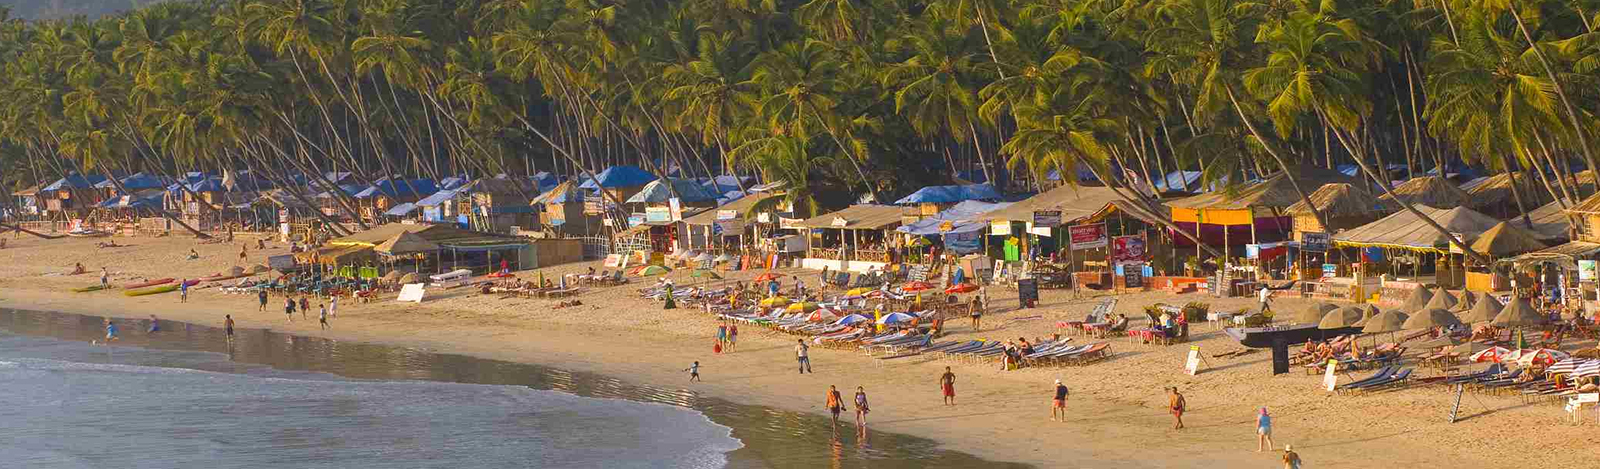 Best of Indian Beaches Tour